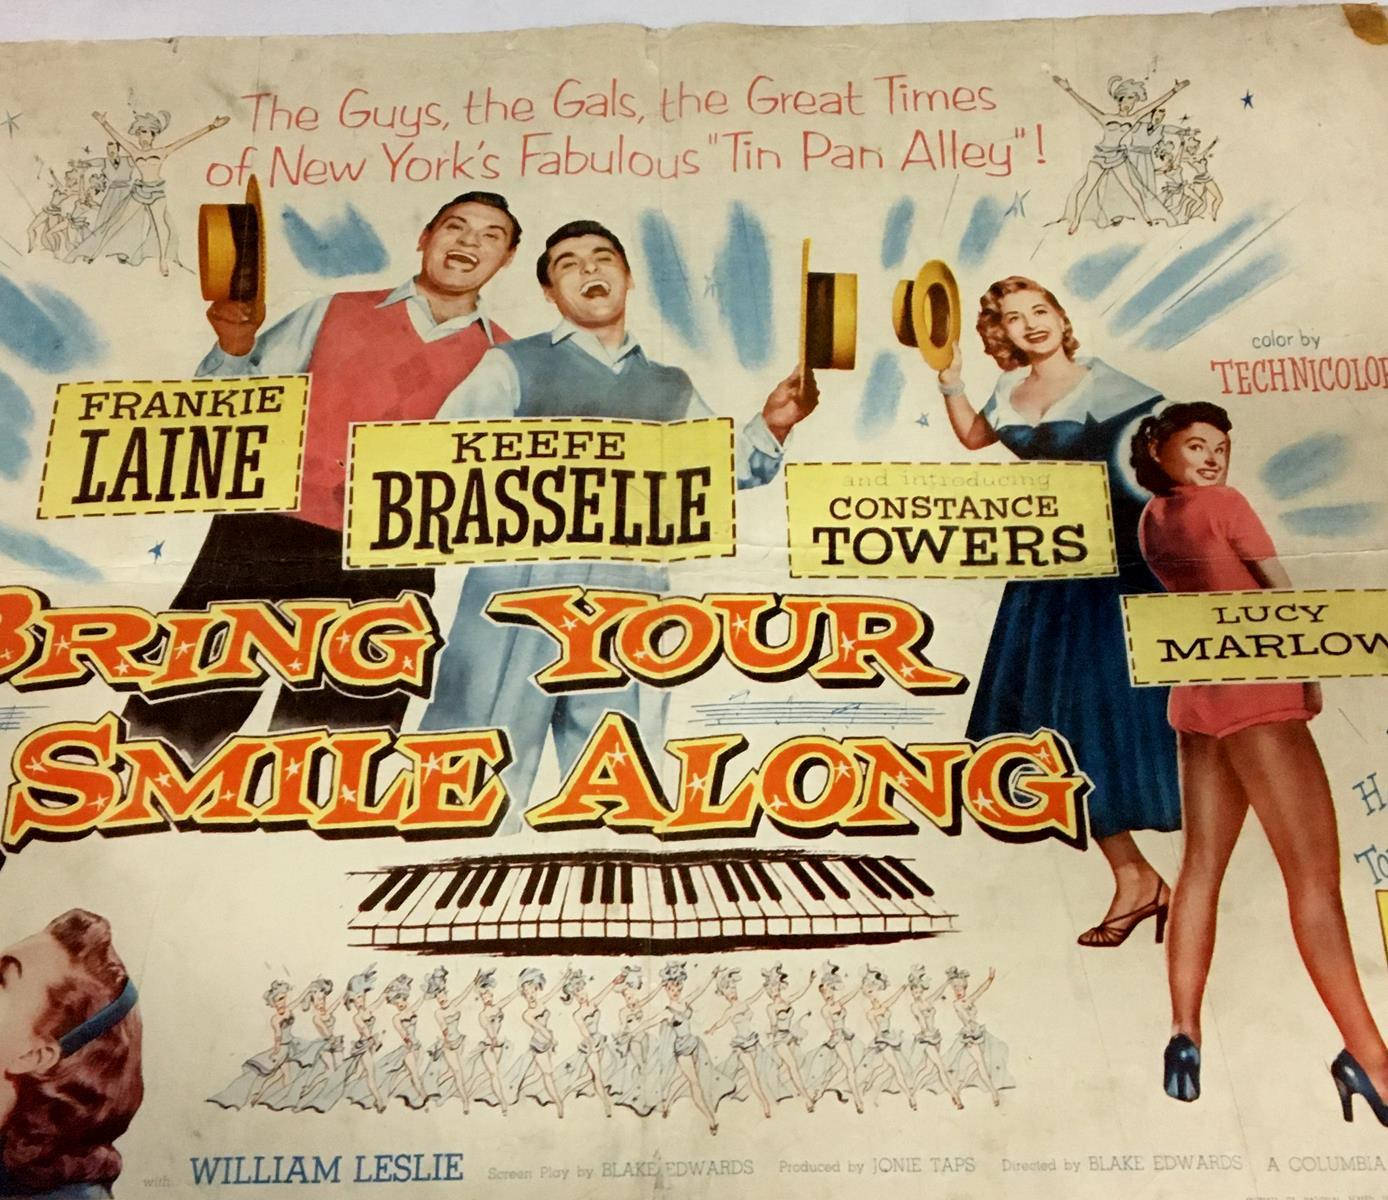 Frankie Laine Bring Your Smile Along Poster Wallpaper